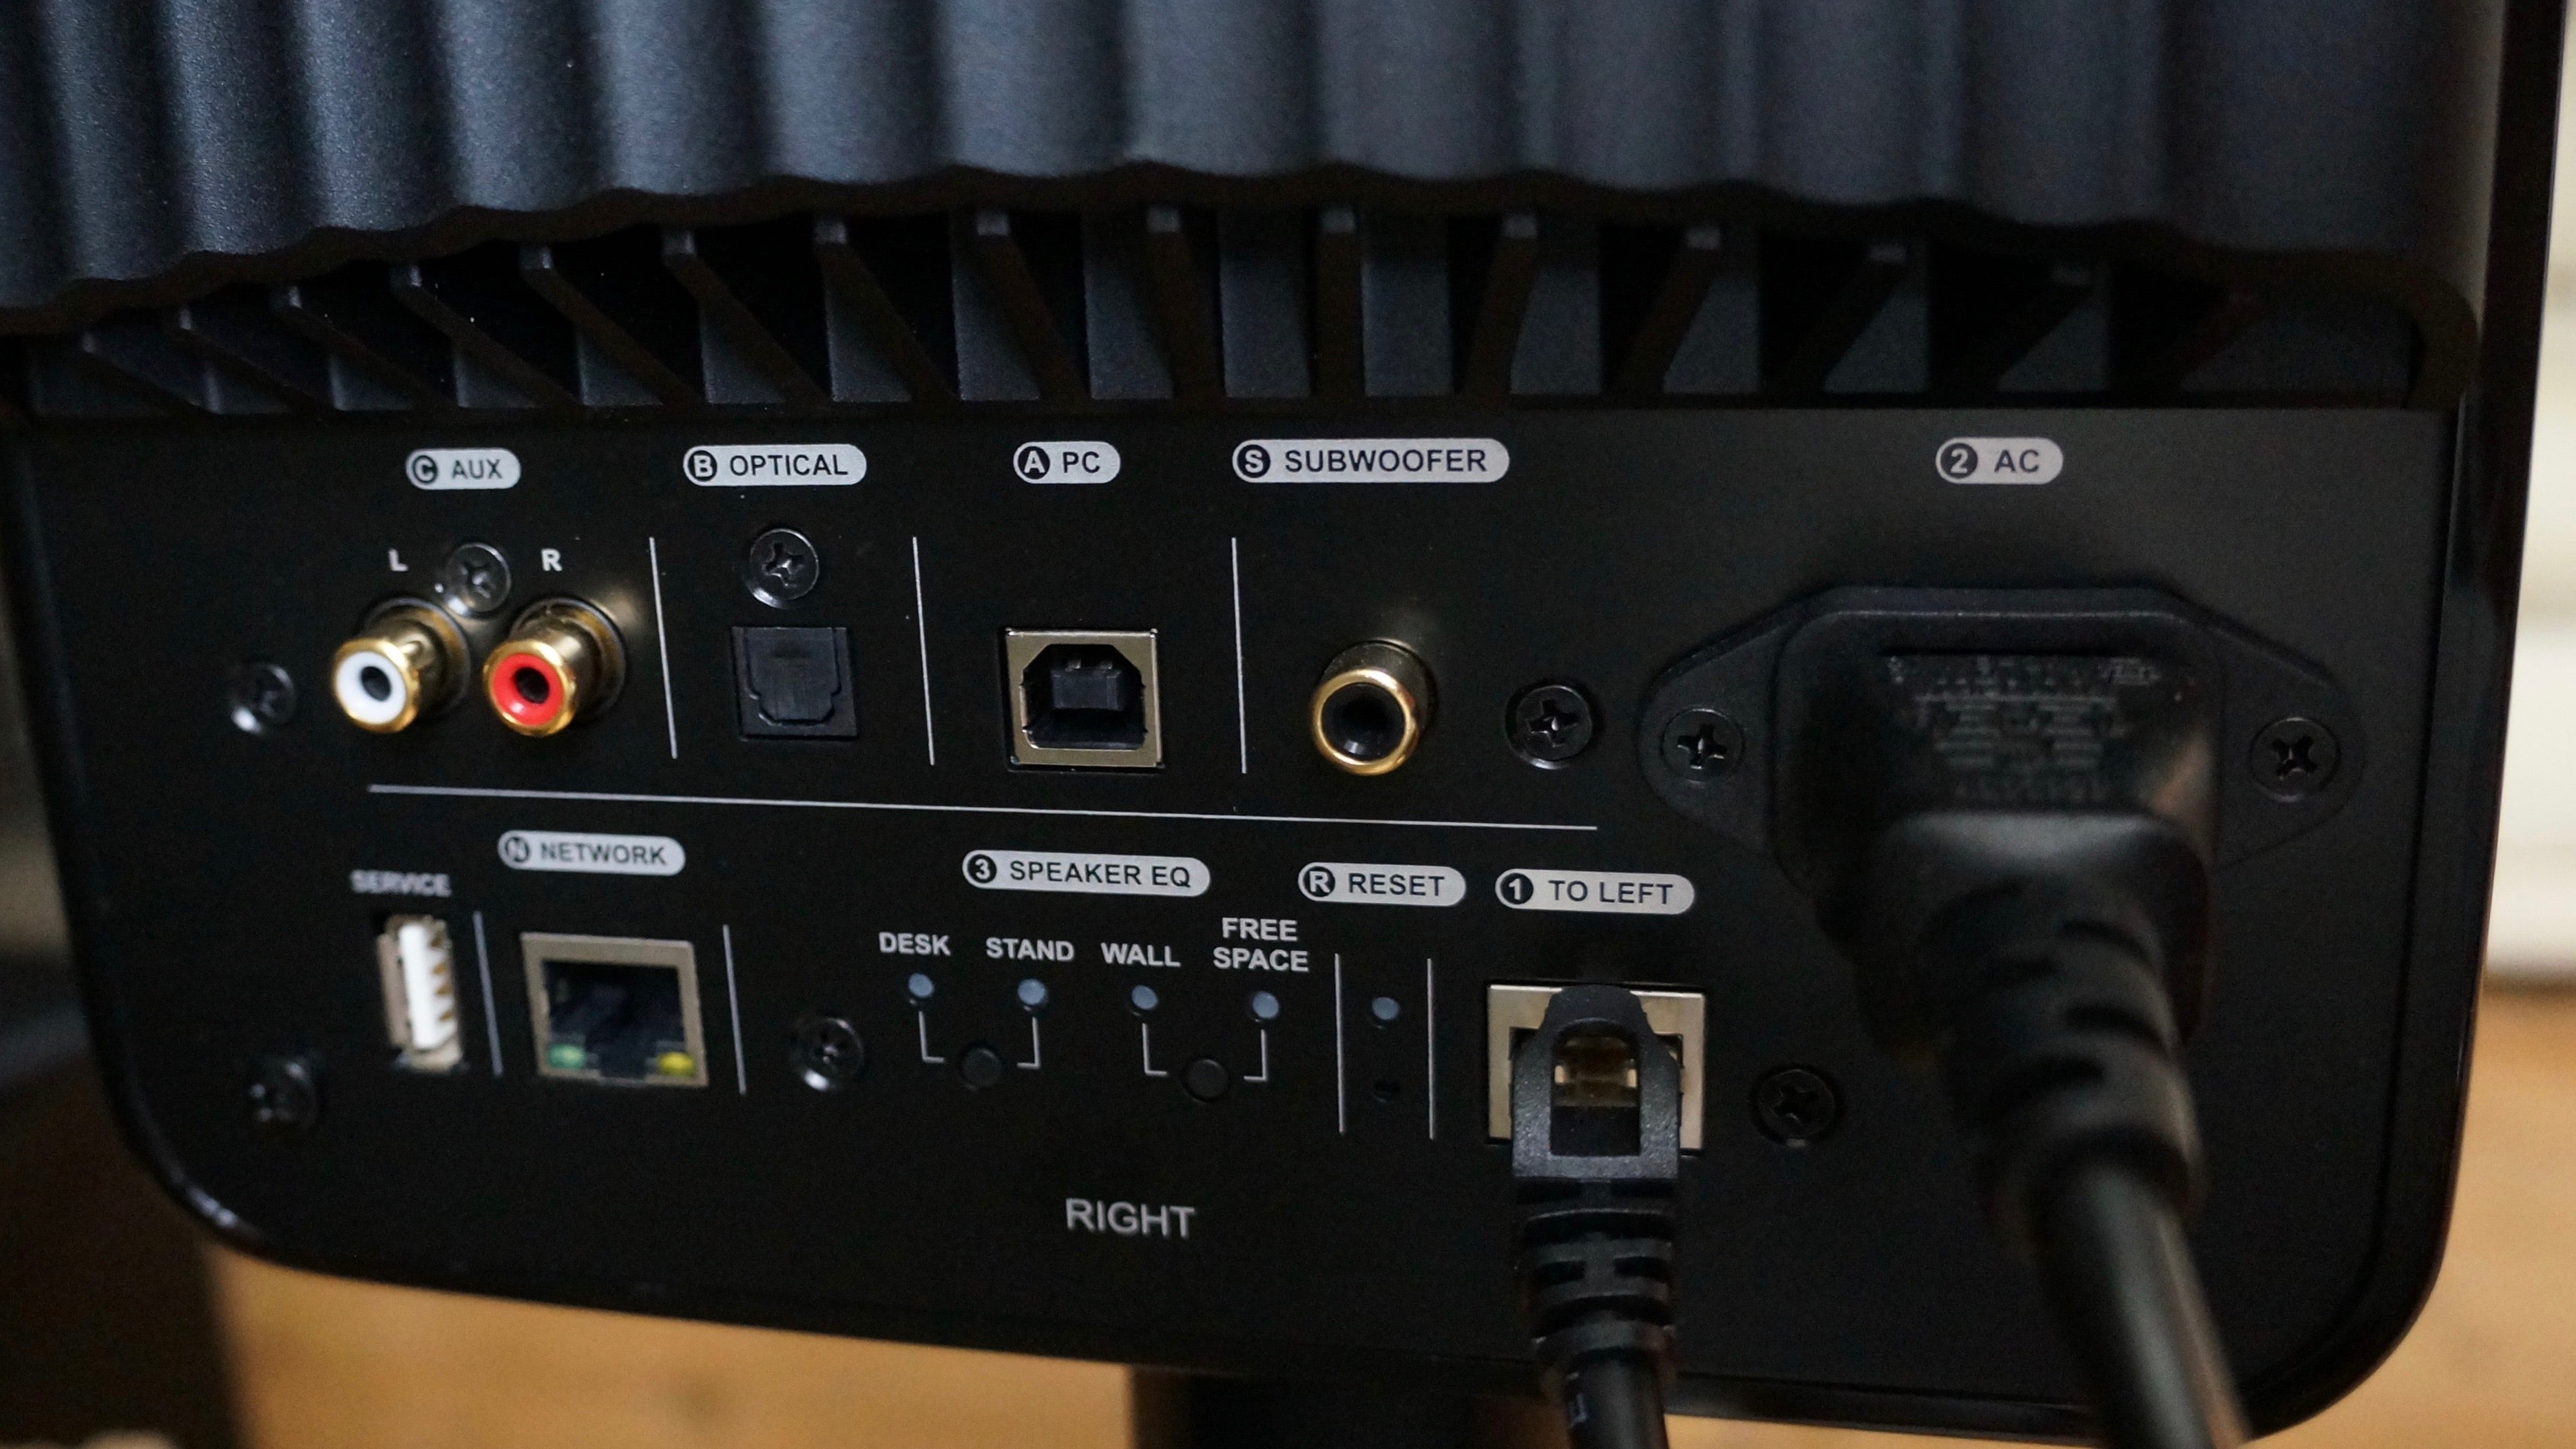 Close-up of KEF LS50 Wireless speaker's connection panel.